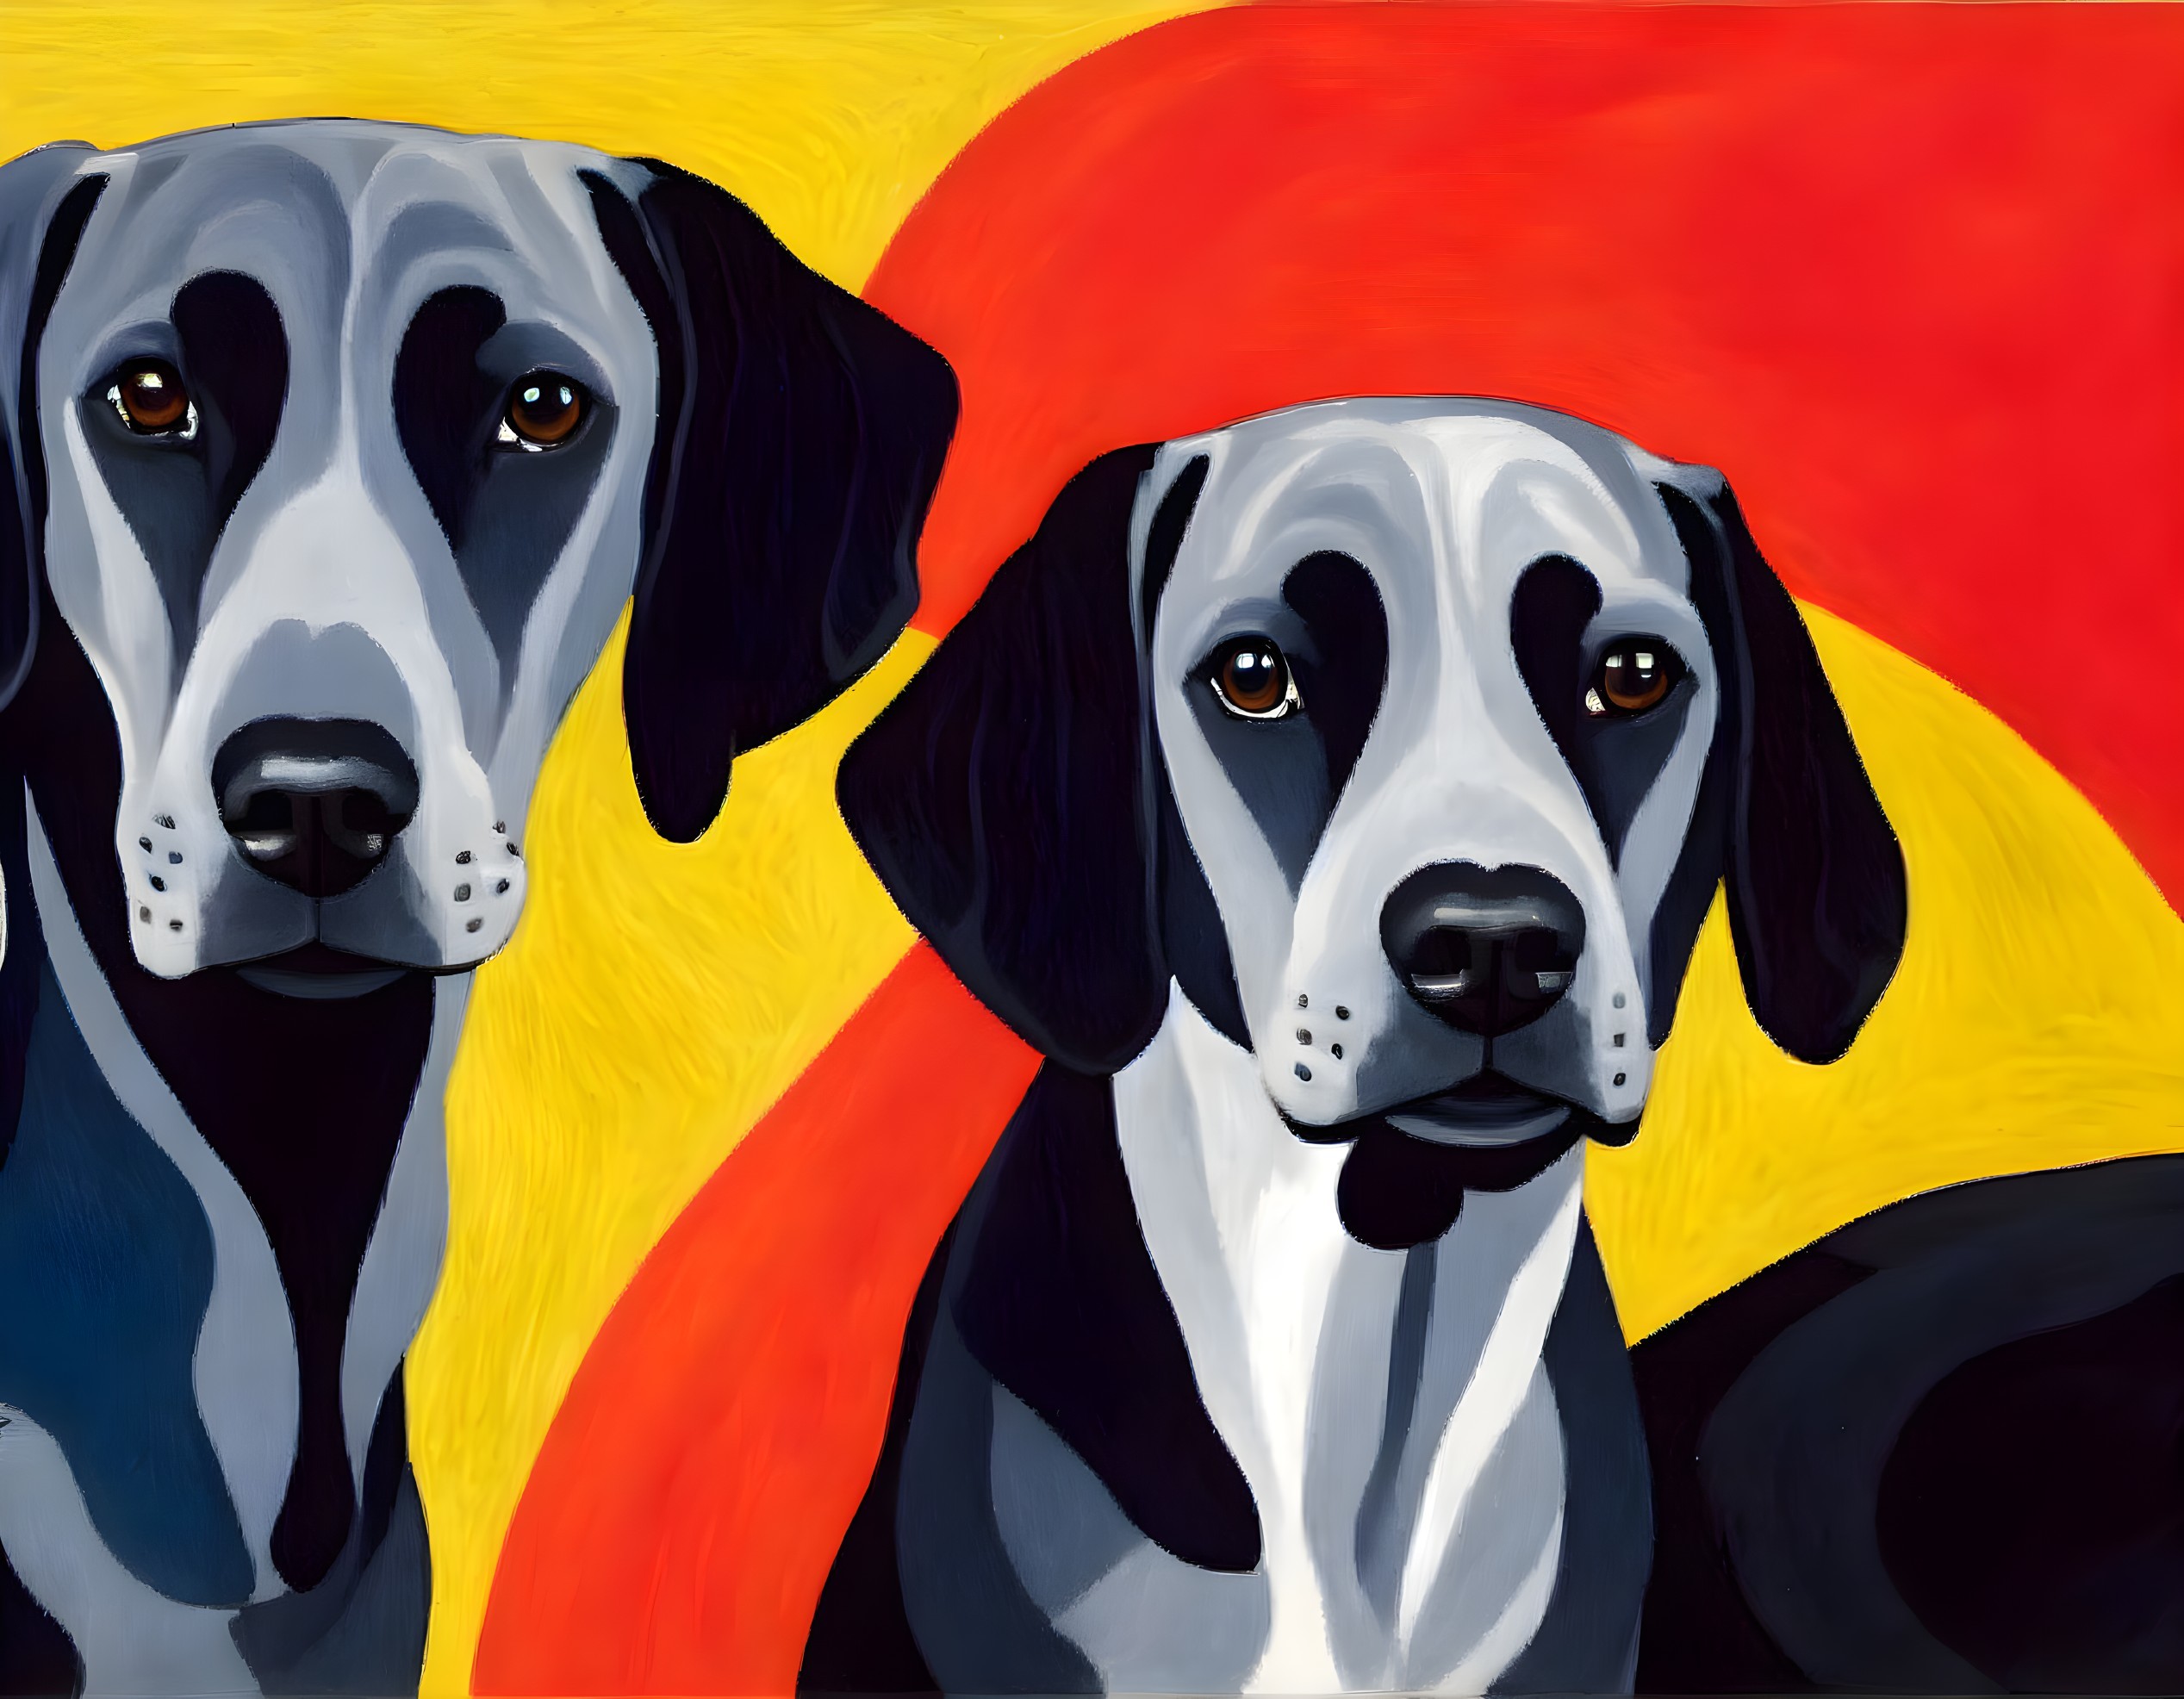 Black and White Dogs on Vibrant Yellow and Red Background Illustration